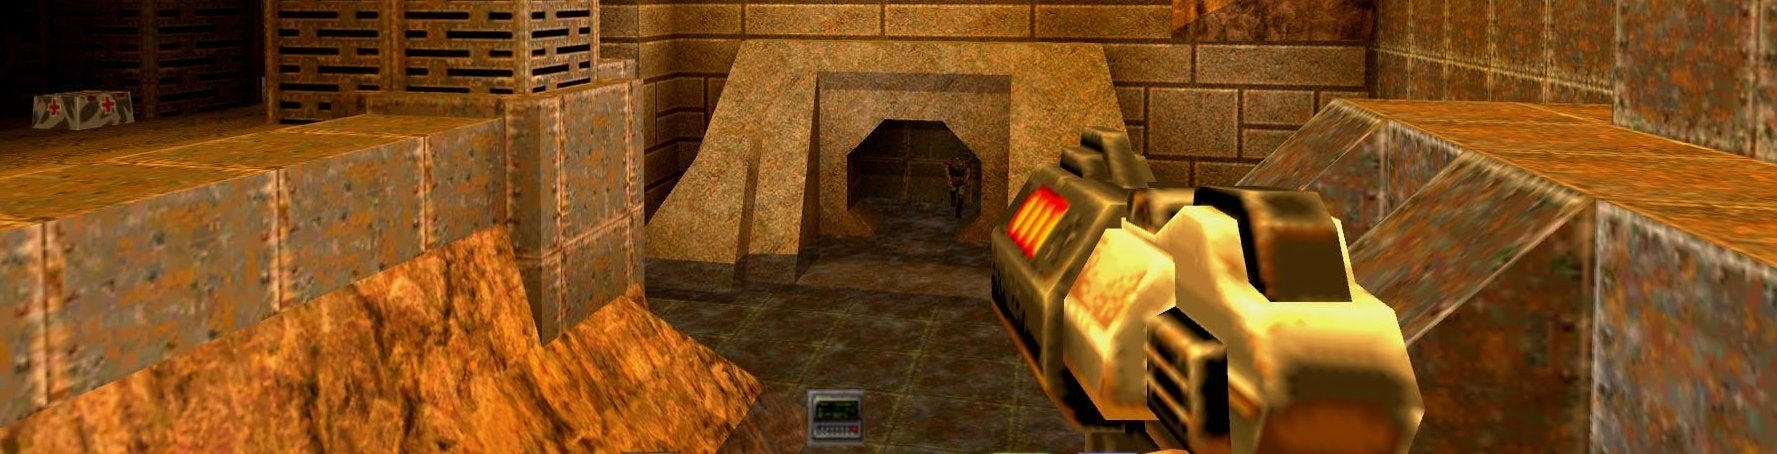 Image for Quake 2 on Xbox 360: the first console HD remaster